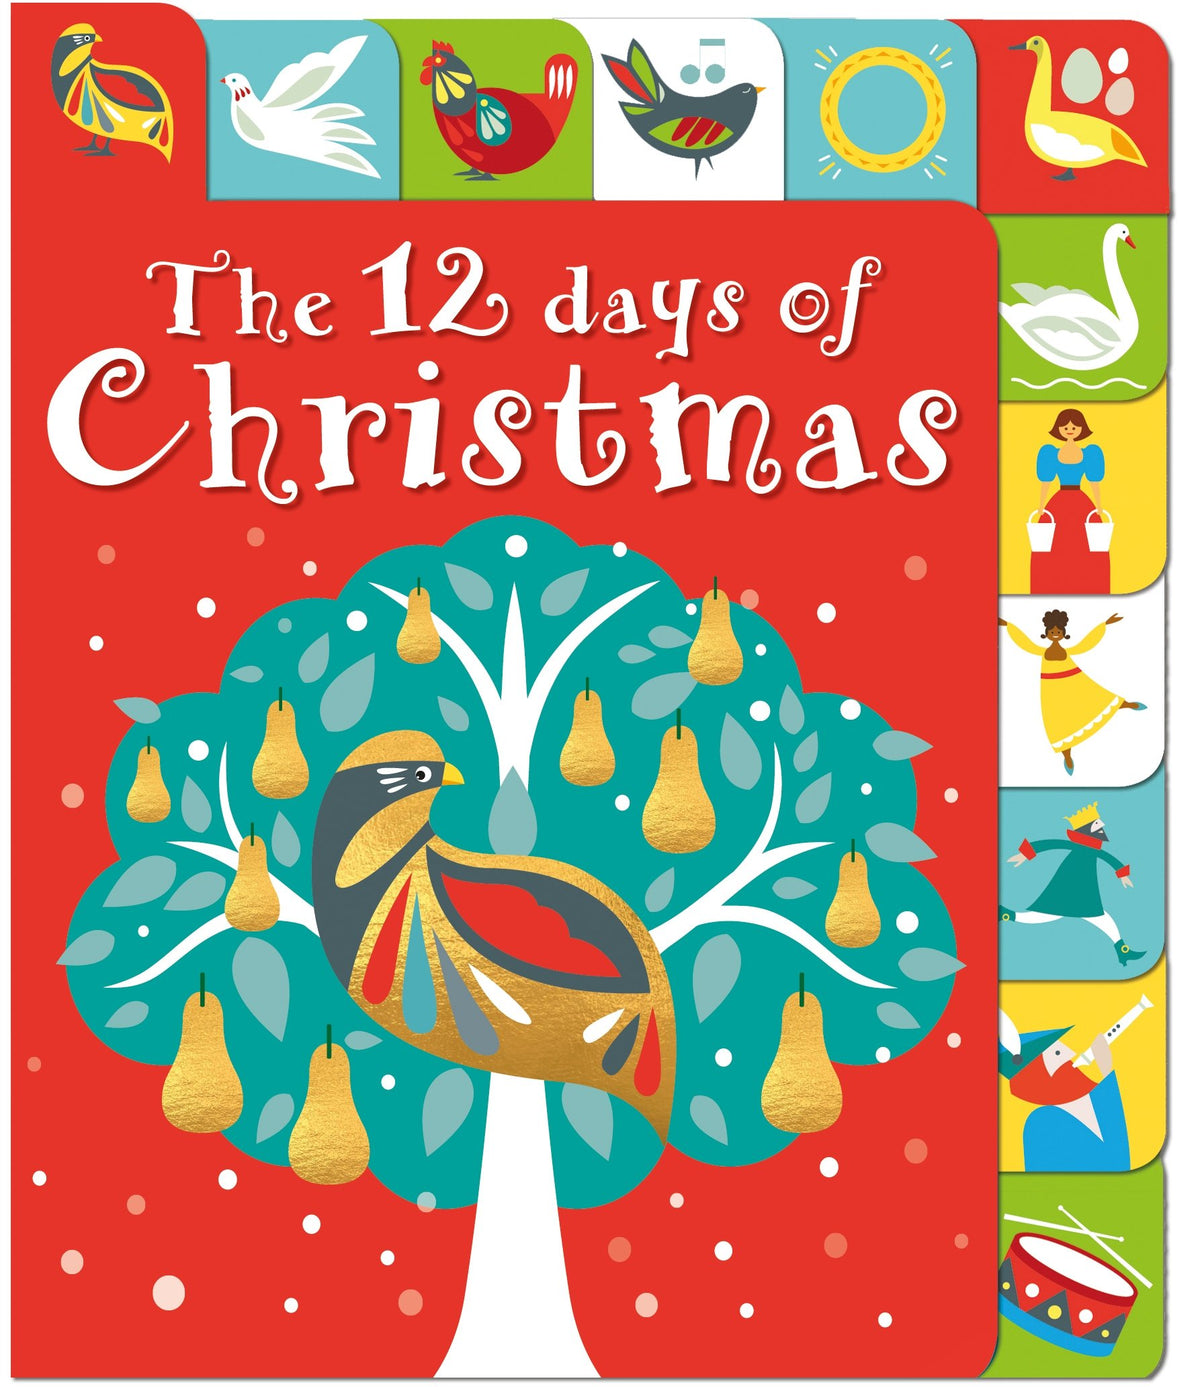 The 12 Days of Christmas - A Lift the Tab Book by Aimee Chapman, Penny Warms, and Kylie Hamley